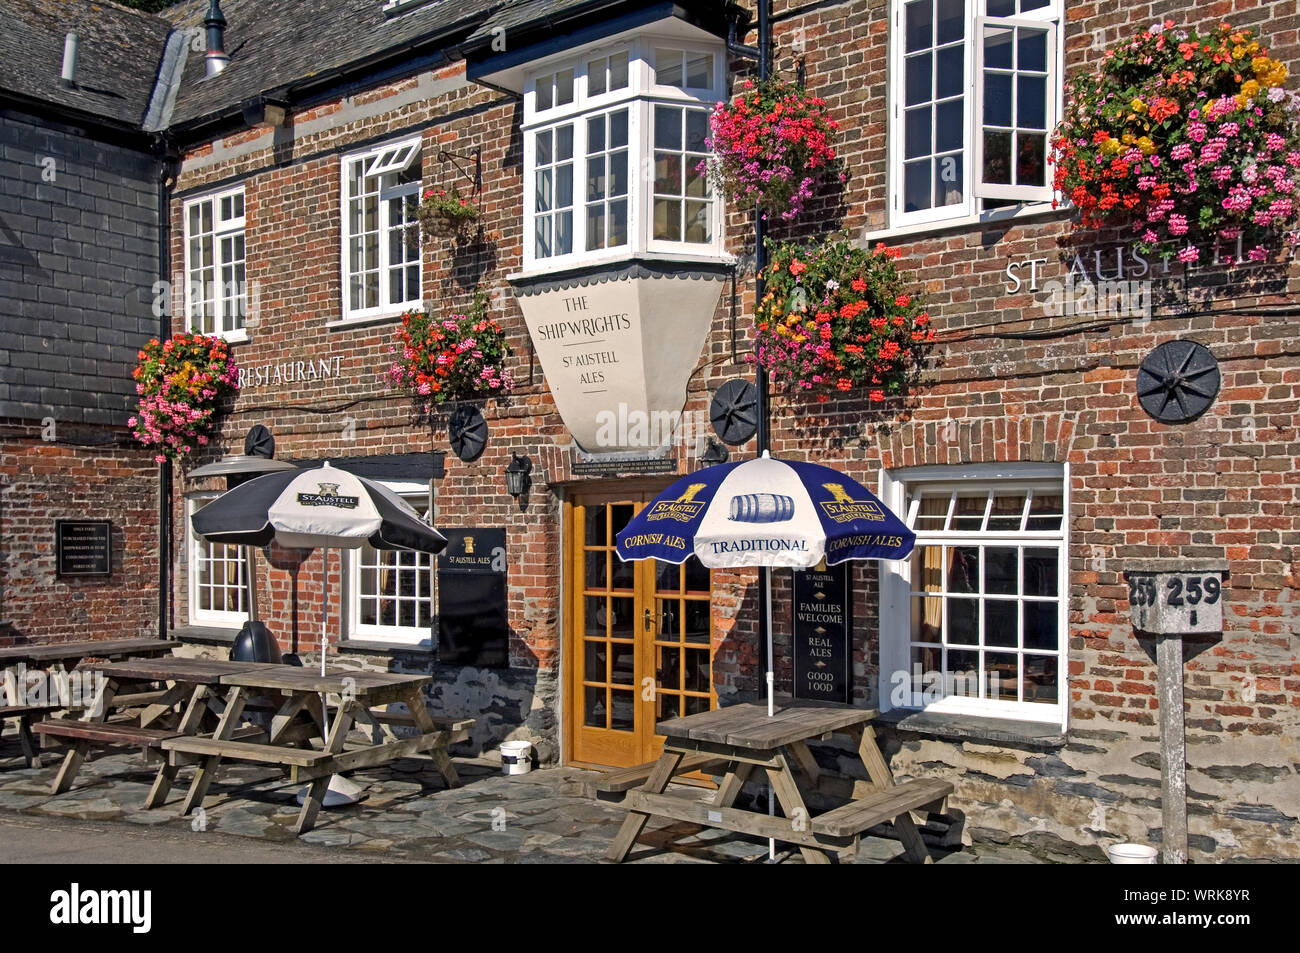 The buildings around the harbor at Padstow, Cornwall, England are built of warm toned brick, such as in this pub Stock Photo